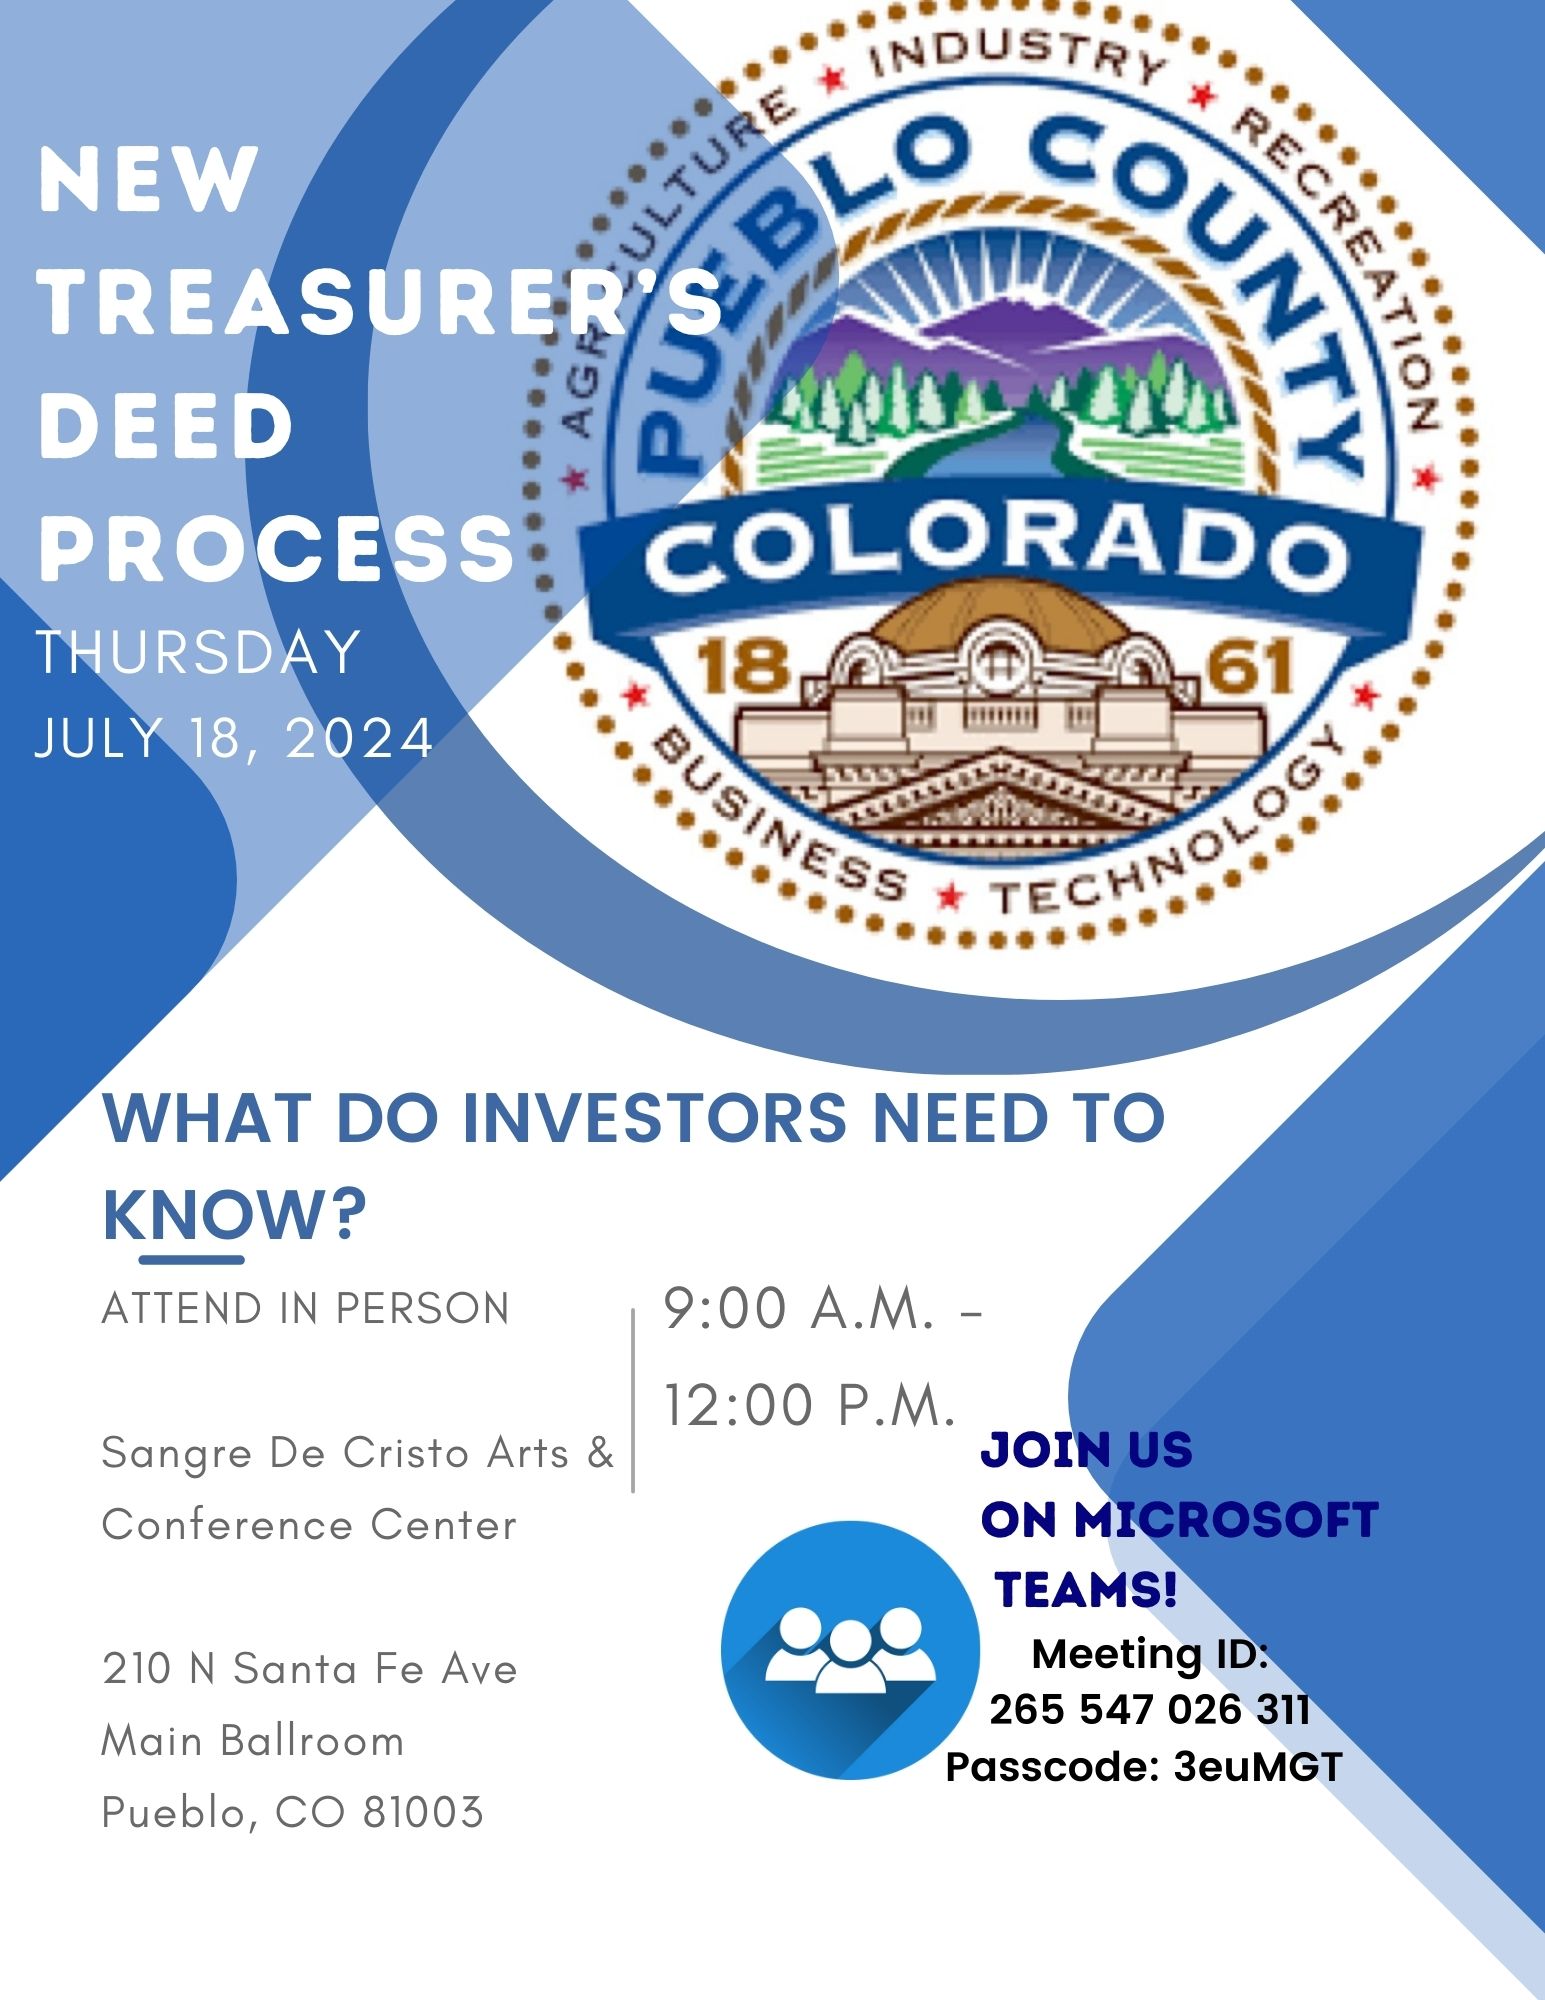 New Treasurer's Deed Process. Thursday July 18, 2024, 9am to 12pm. What do investors need to know? Attend in person: Sangre de Cristo Arts Center, 210 N Santa Fe Ave, Main Ballroom, Pueblo, CO 81003. Or join us on Microsoft Teams: Meeting ID 265 547 026 311 passcode 3euMGT